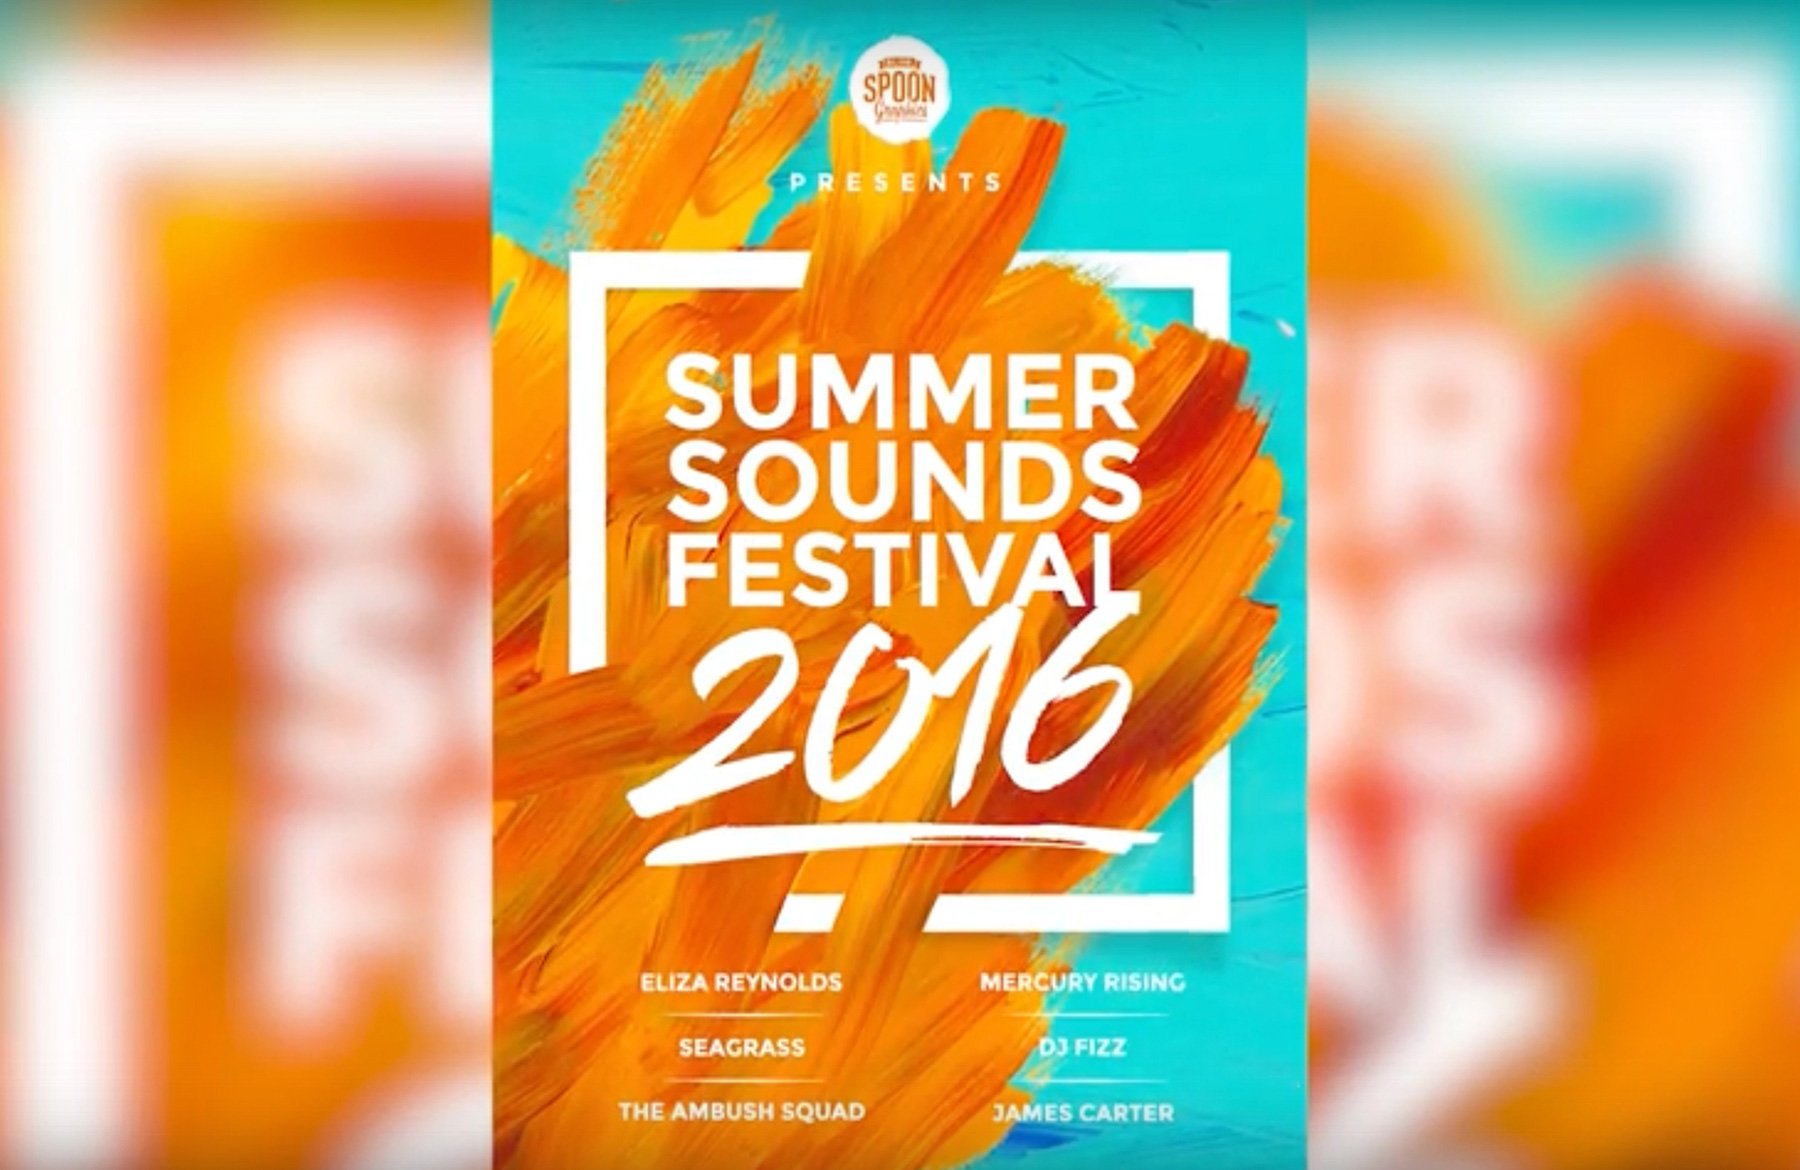 music festival posters designs